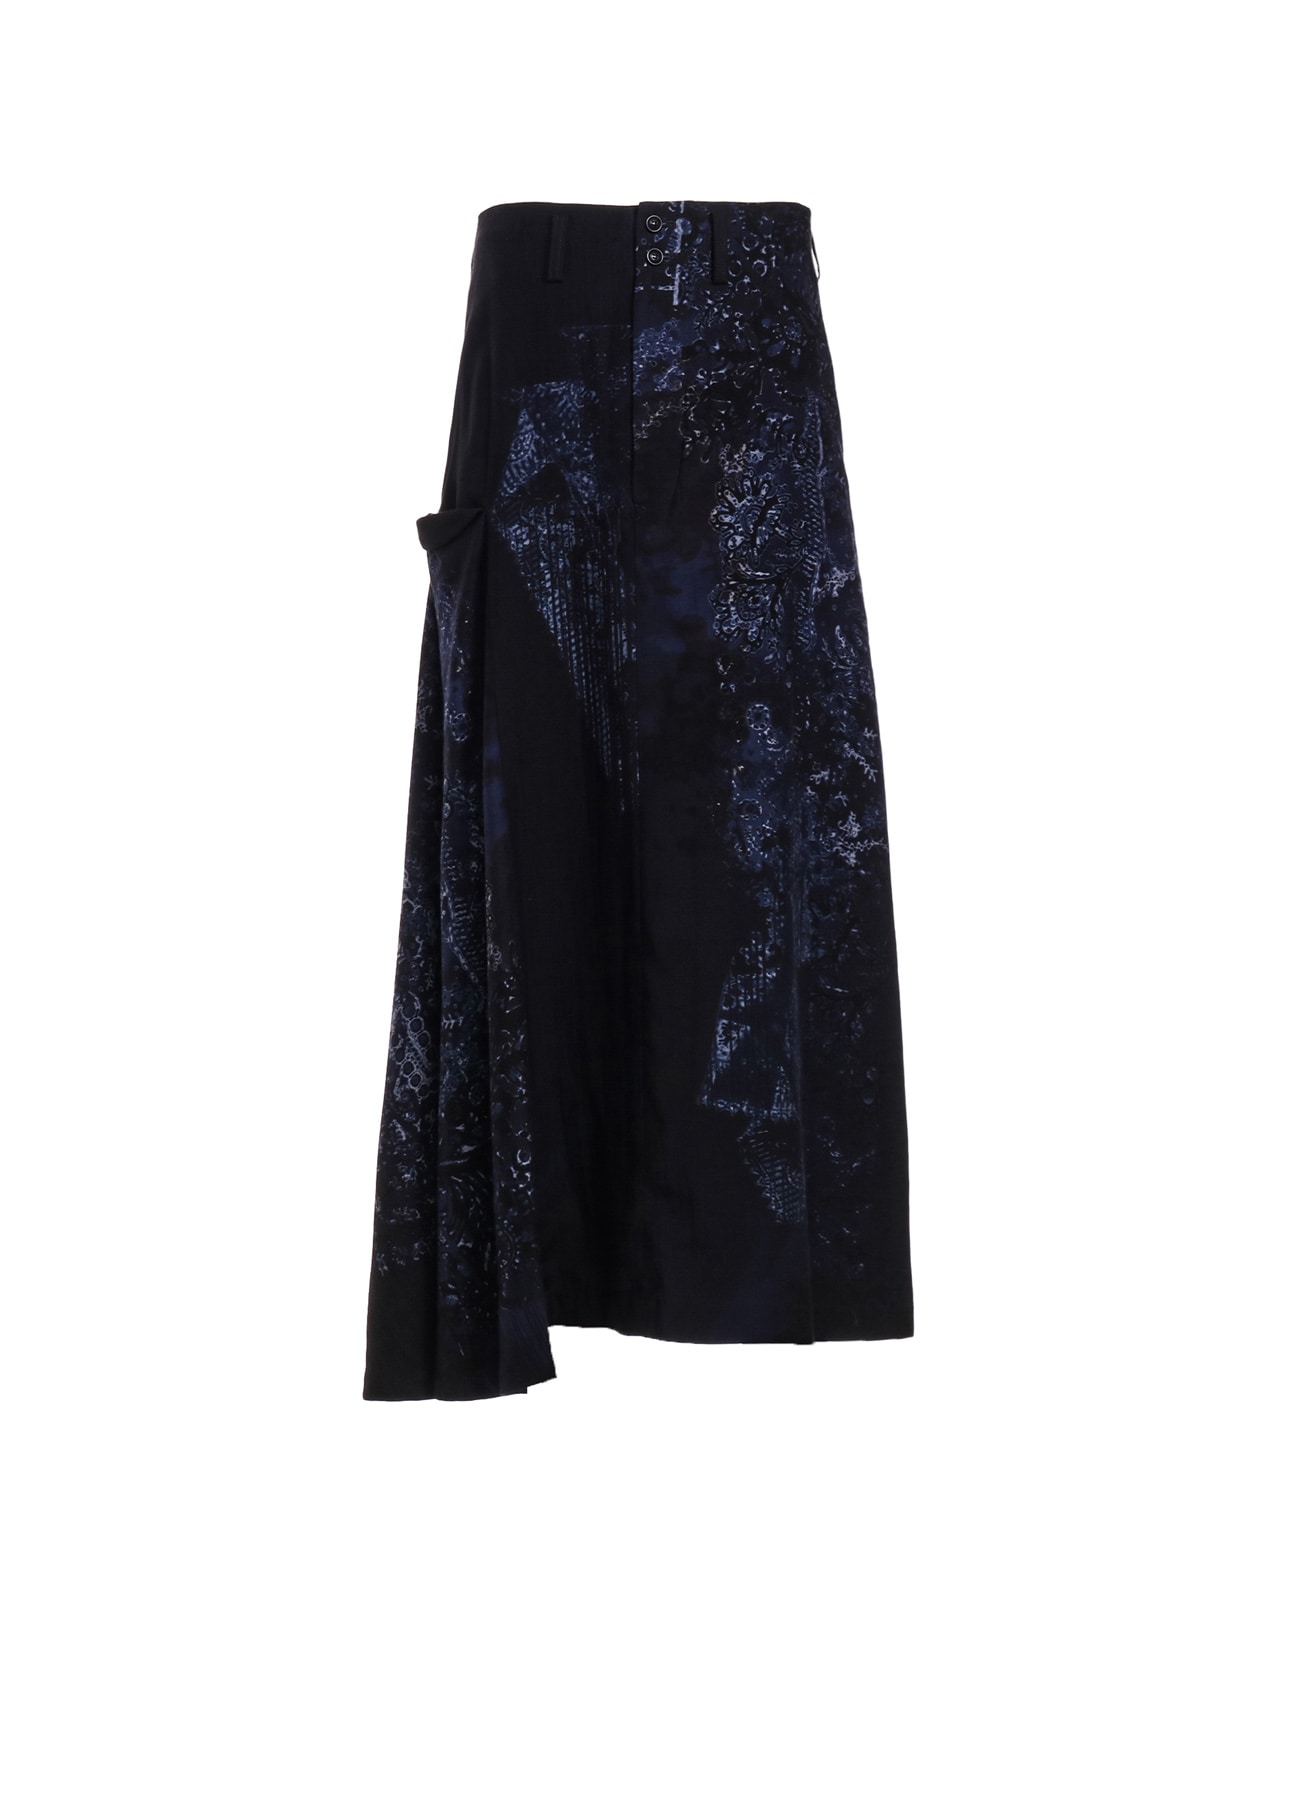 CU/ TWILL LACE DESIGN PT RIGHT FLARE SKIRT